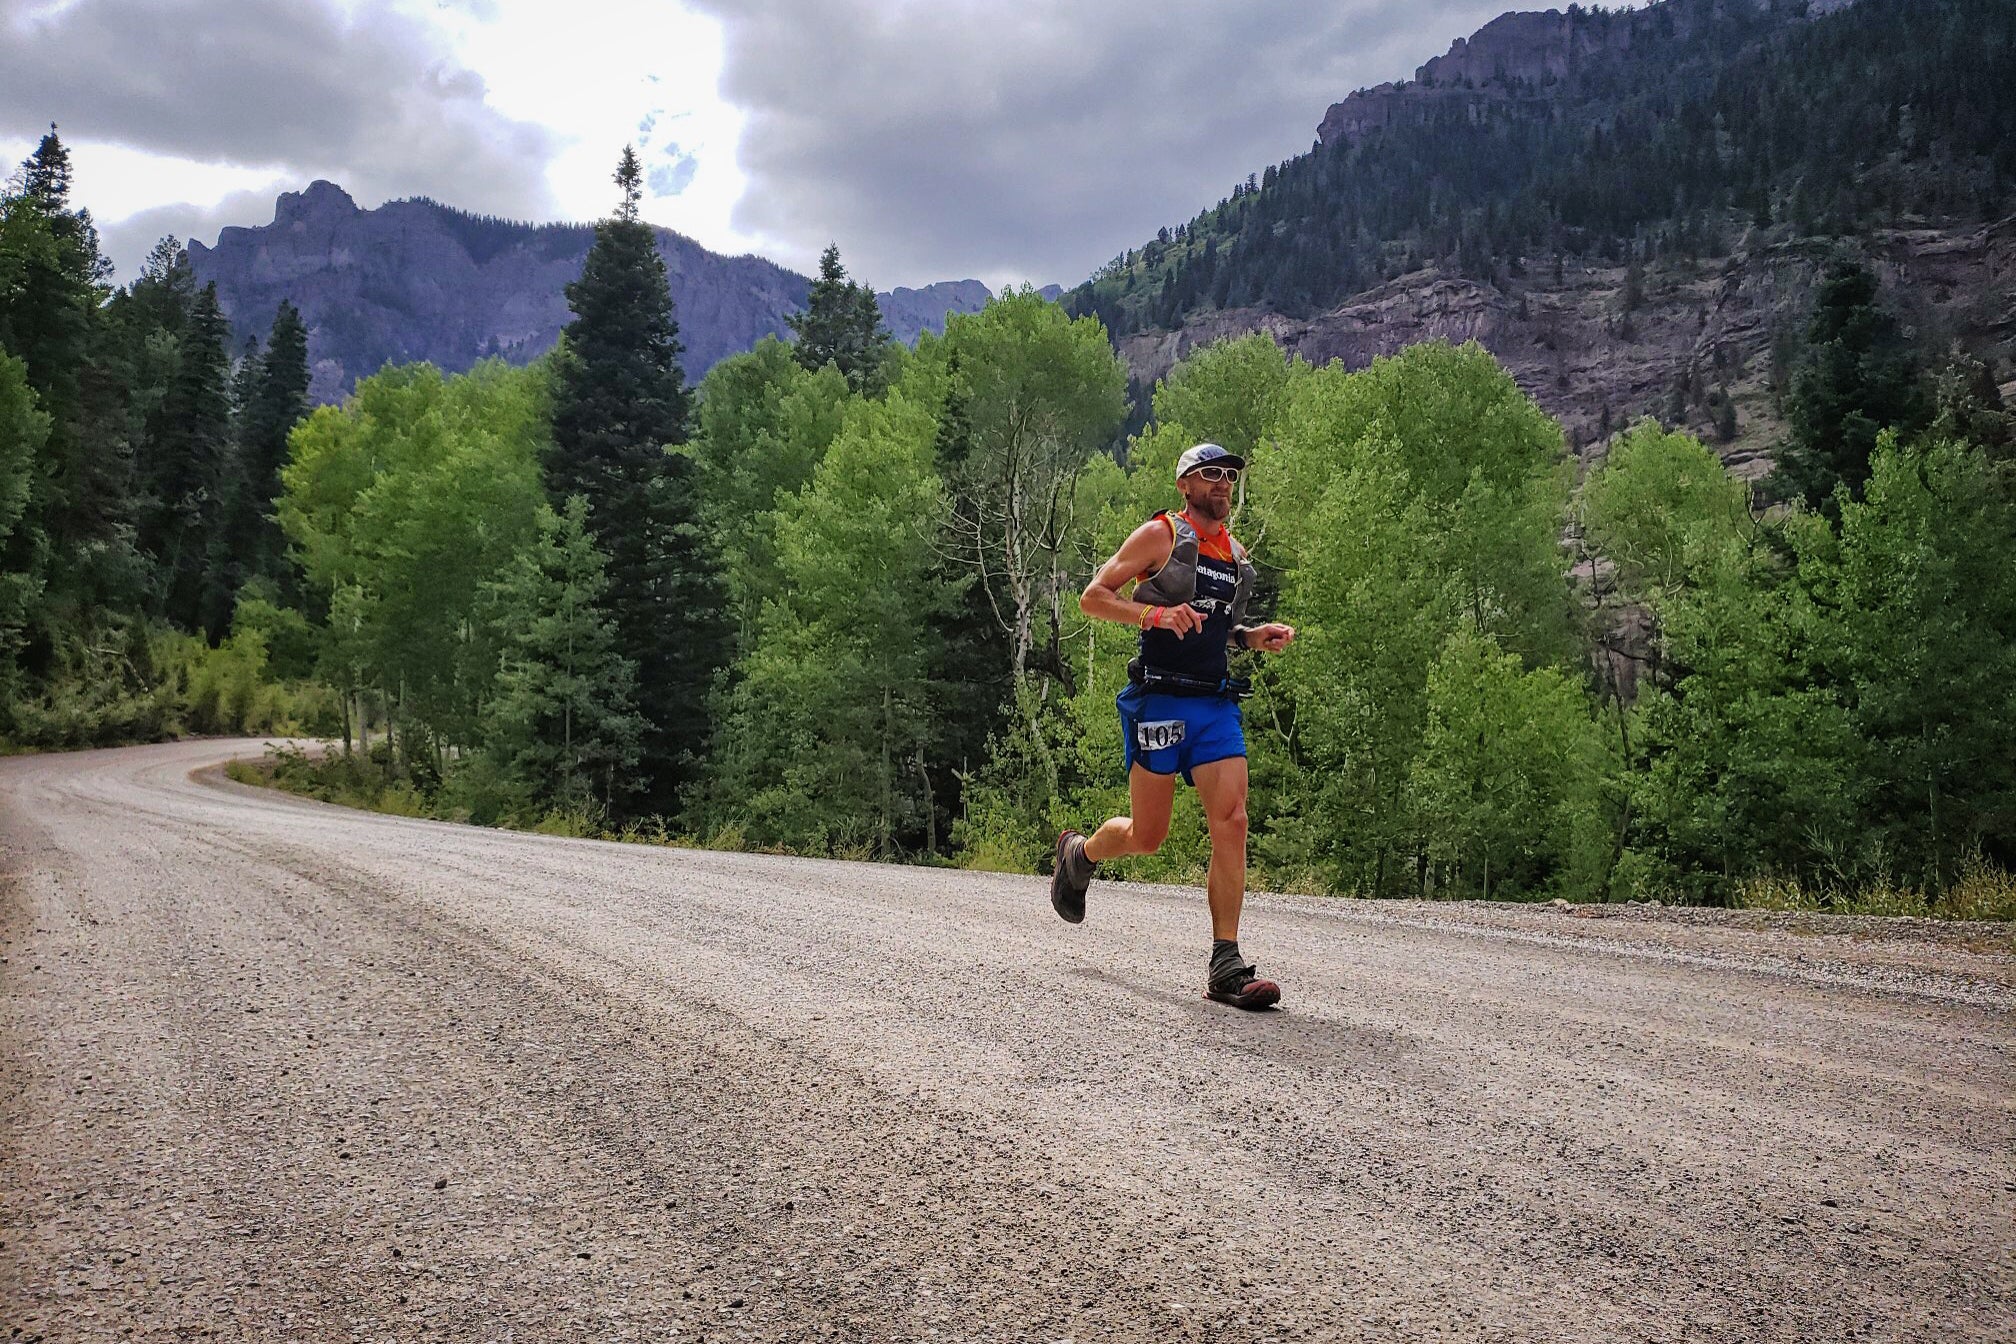 The 2021 Hardrock 100: What You Need To Know